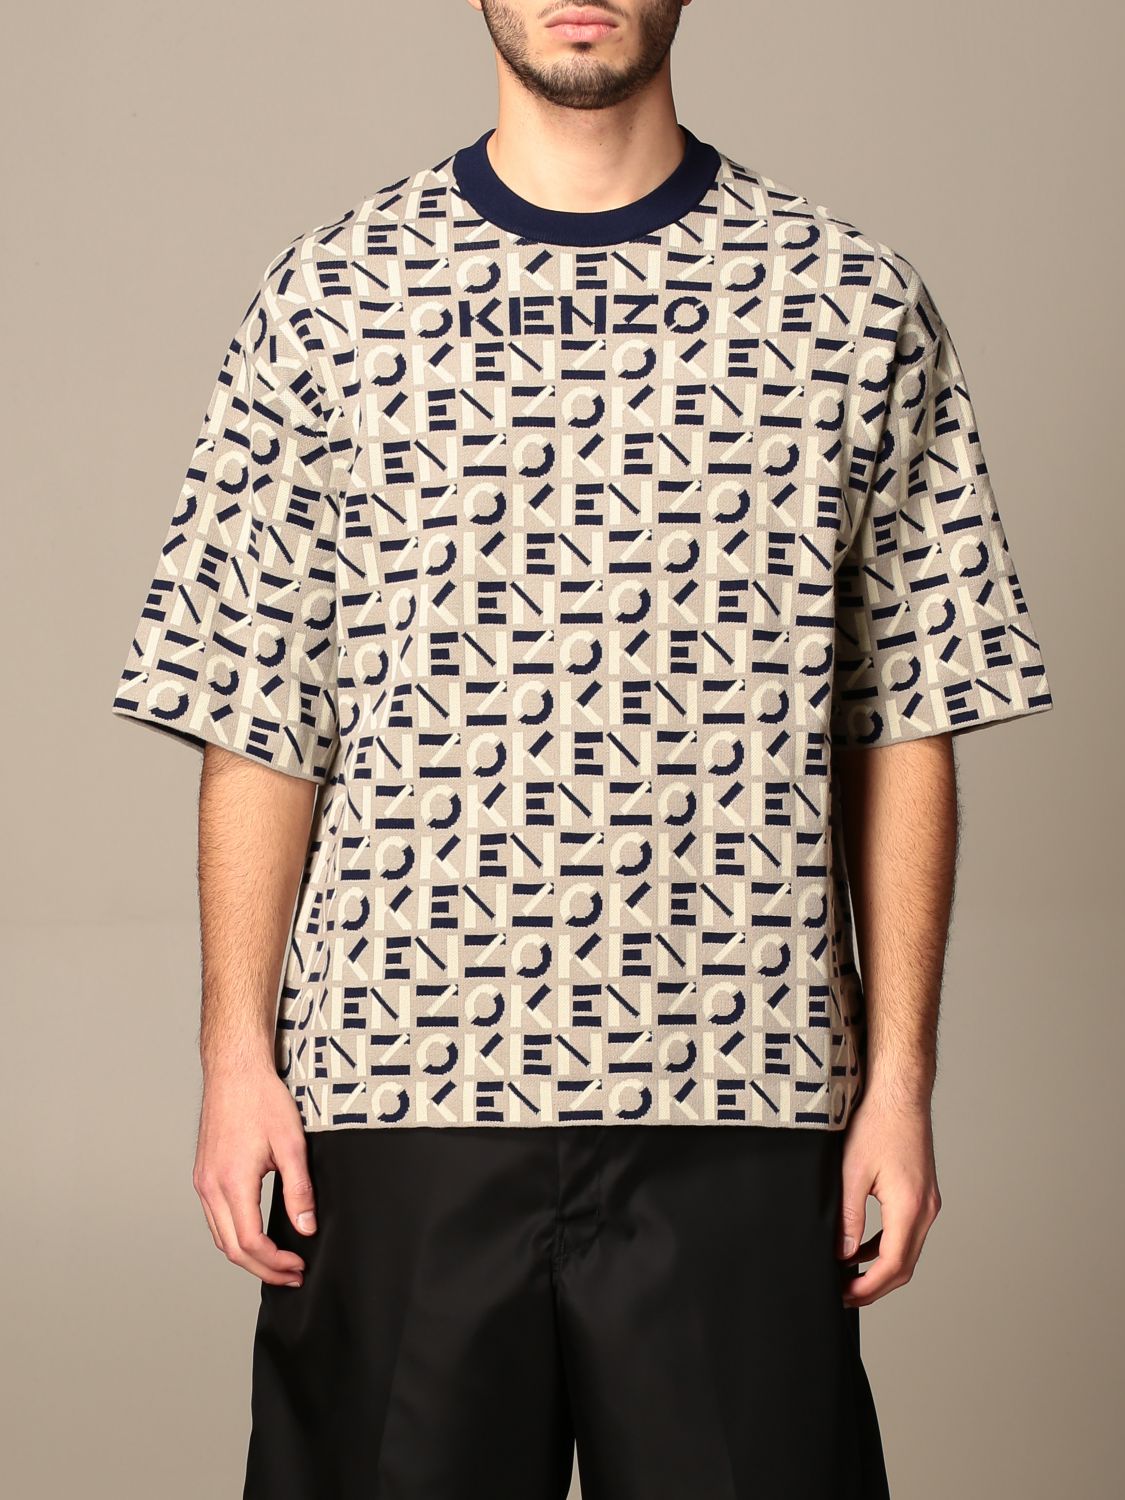 KENZO: crew neck T-shirt with all over logo | T-Shirt Kenzo Men 